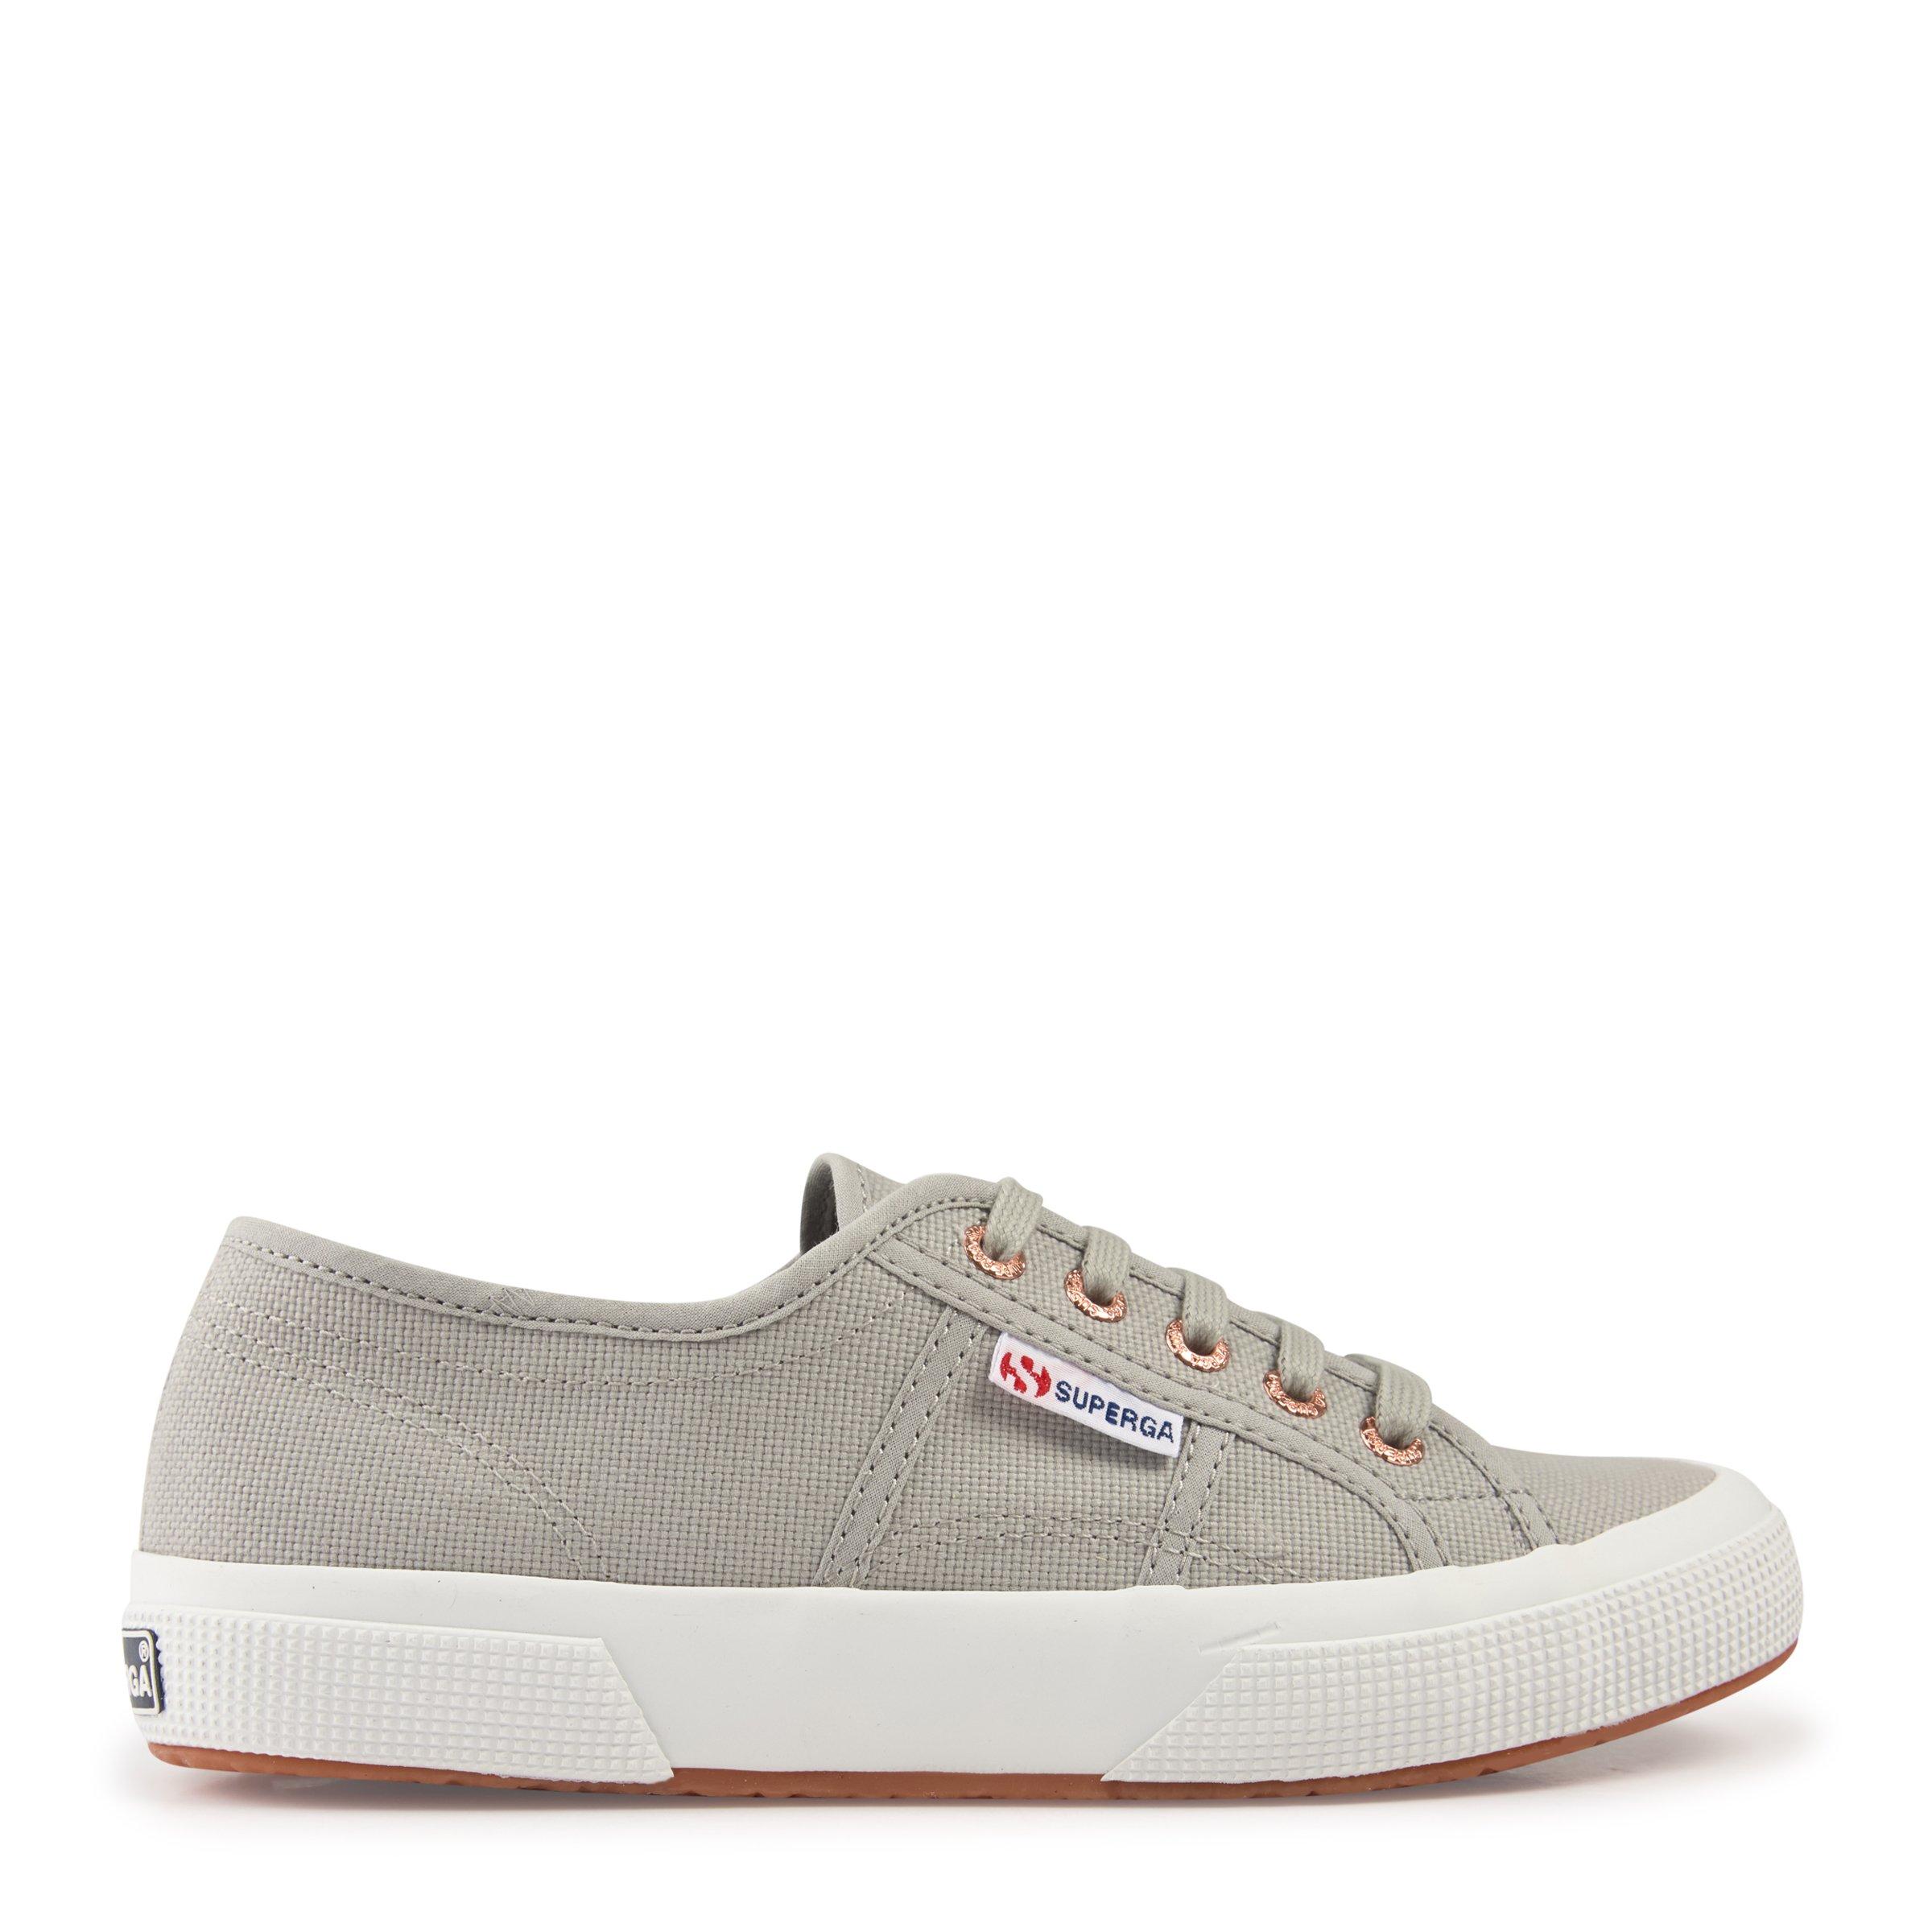 Buy Superga 2750 Canvas Sneakers Online | Office London